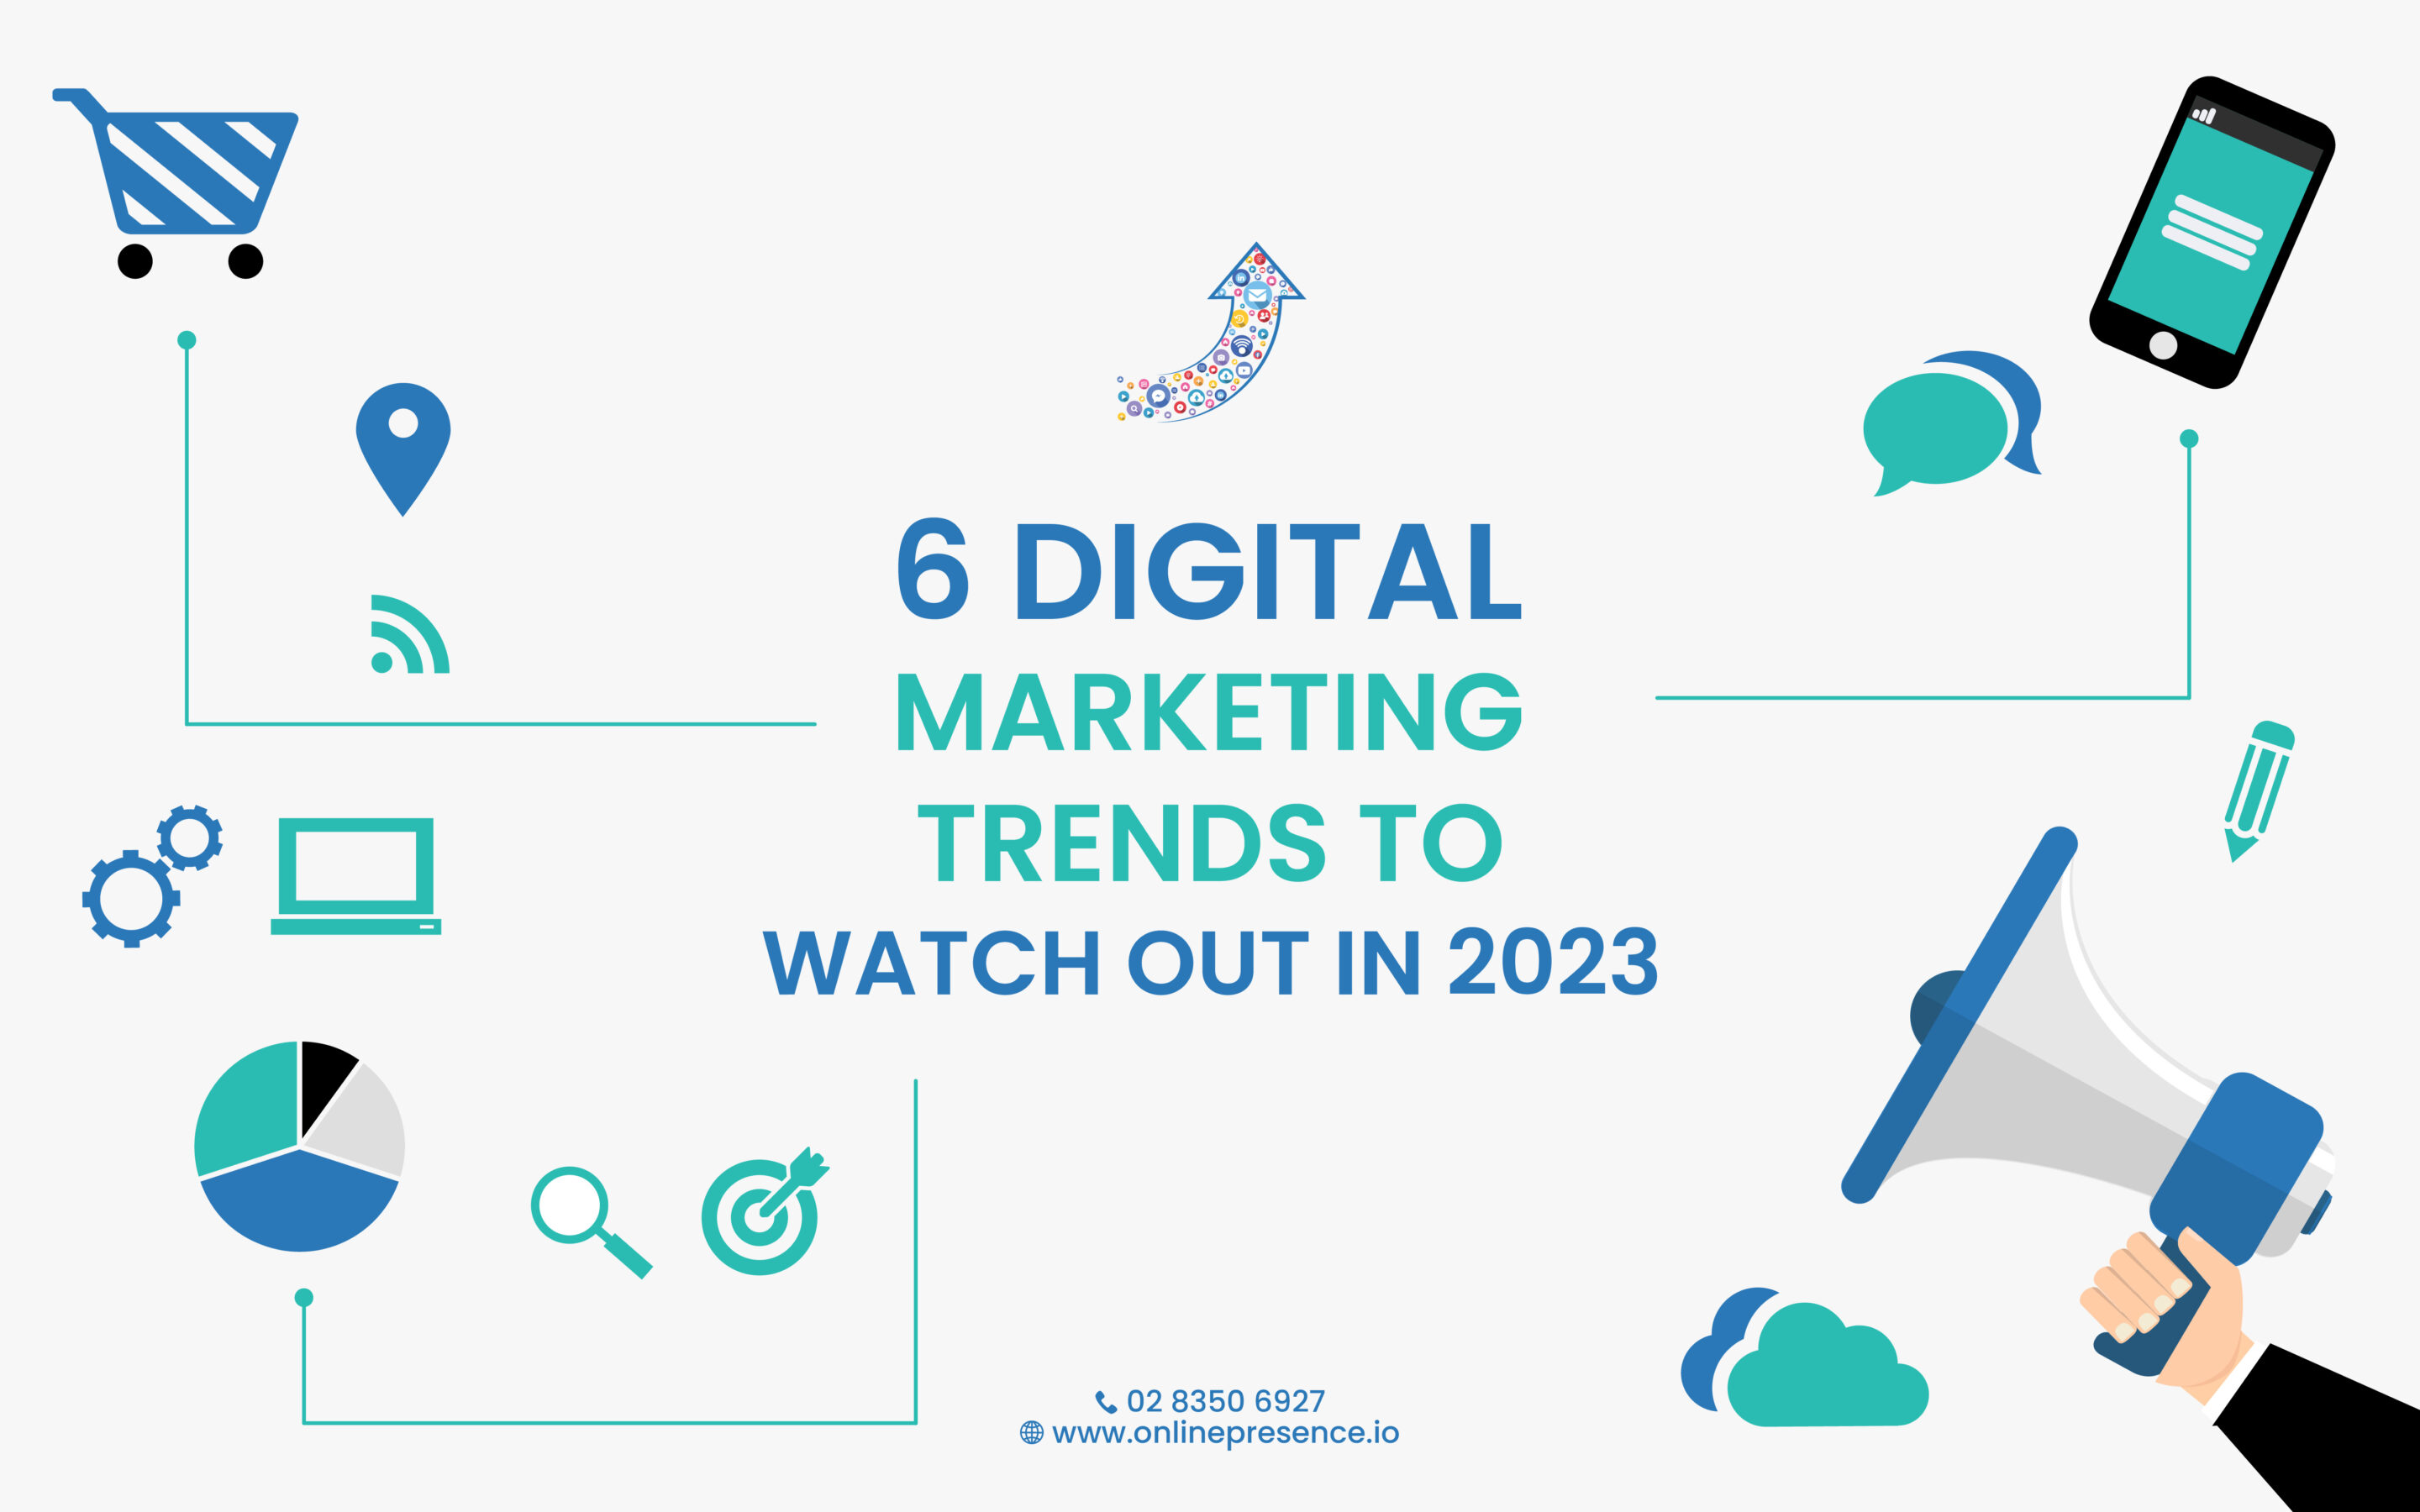 6 Digital Marketing Trends to Watch out in 2023